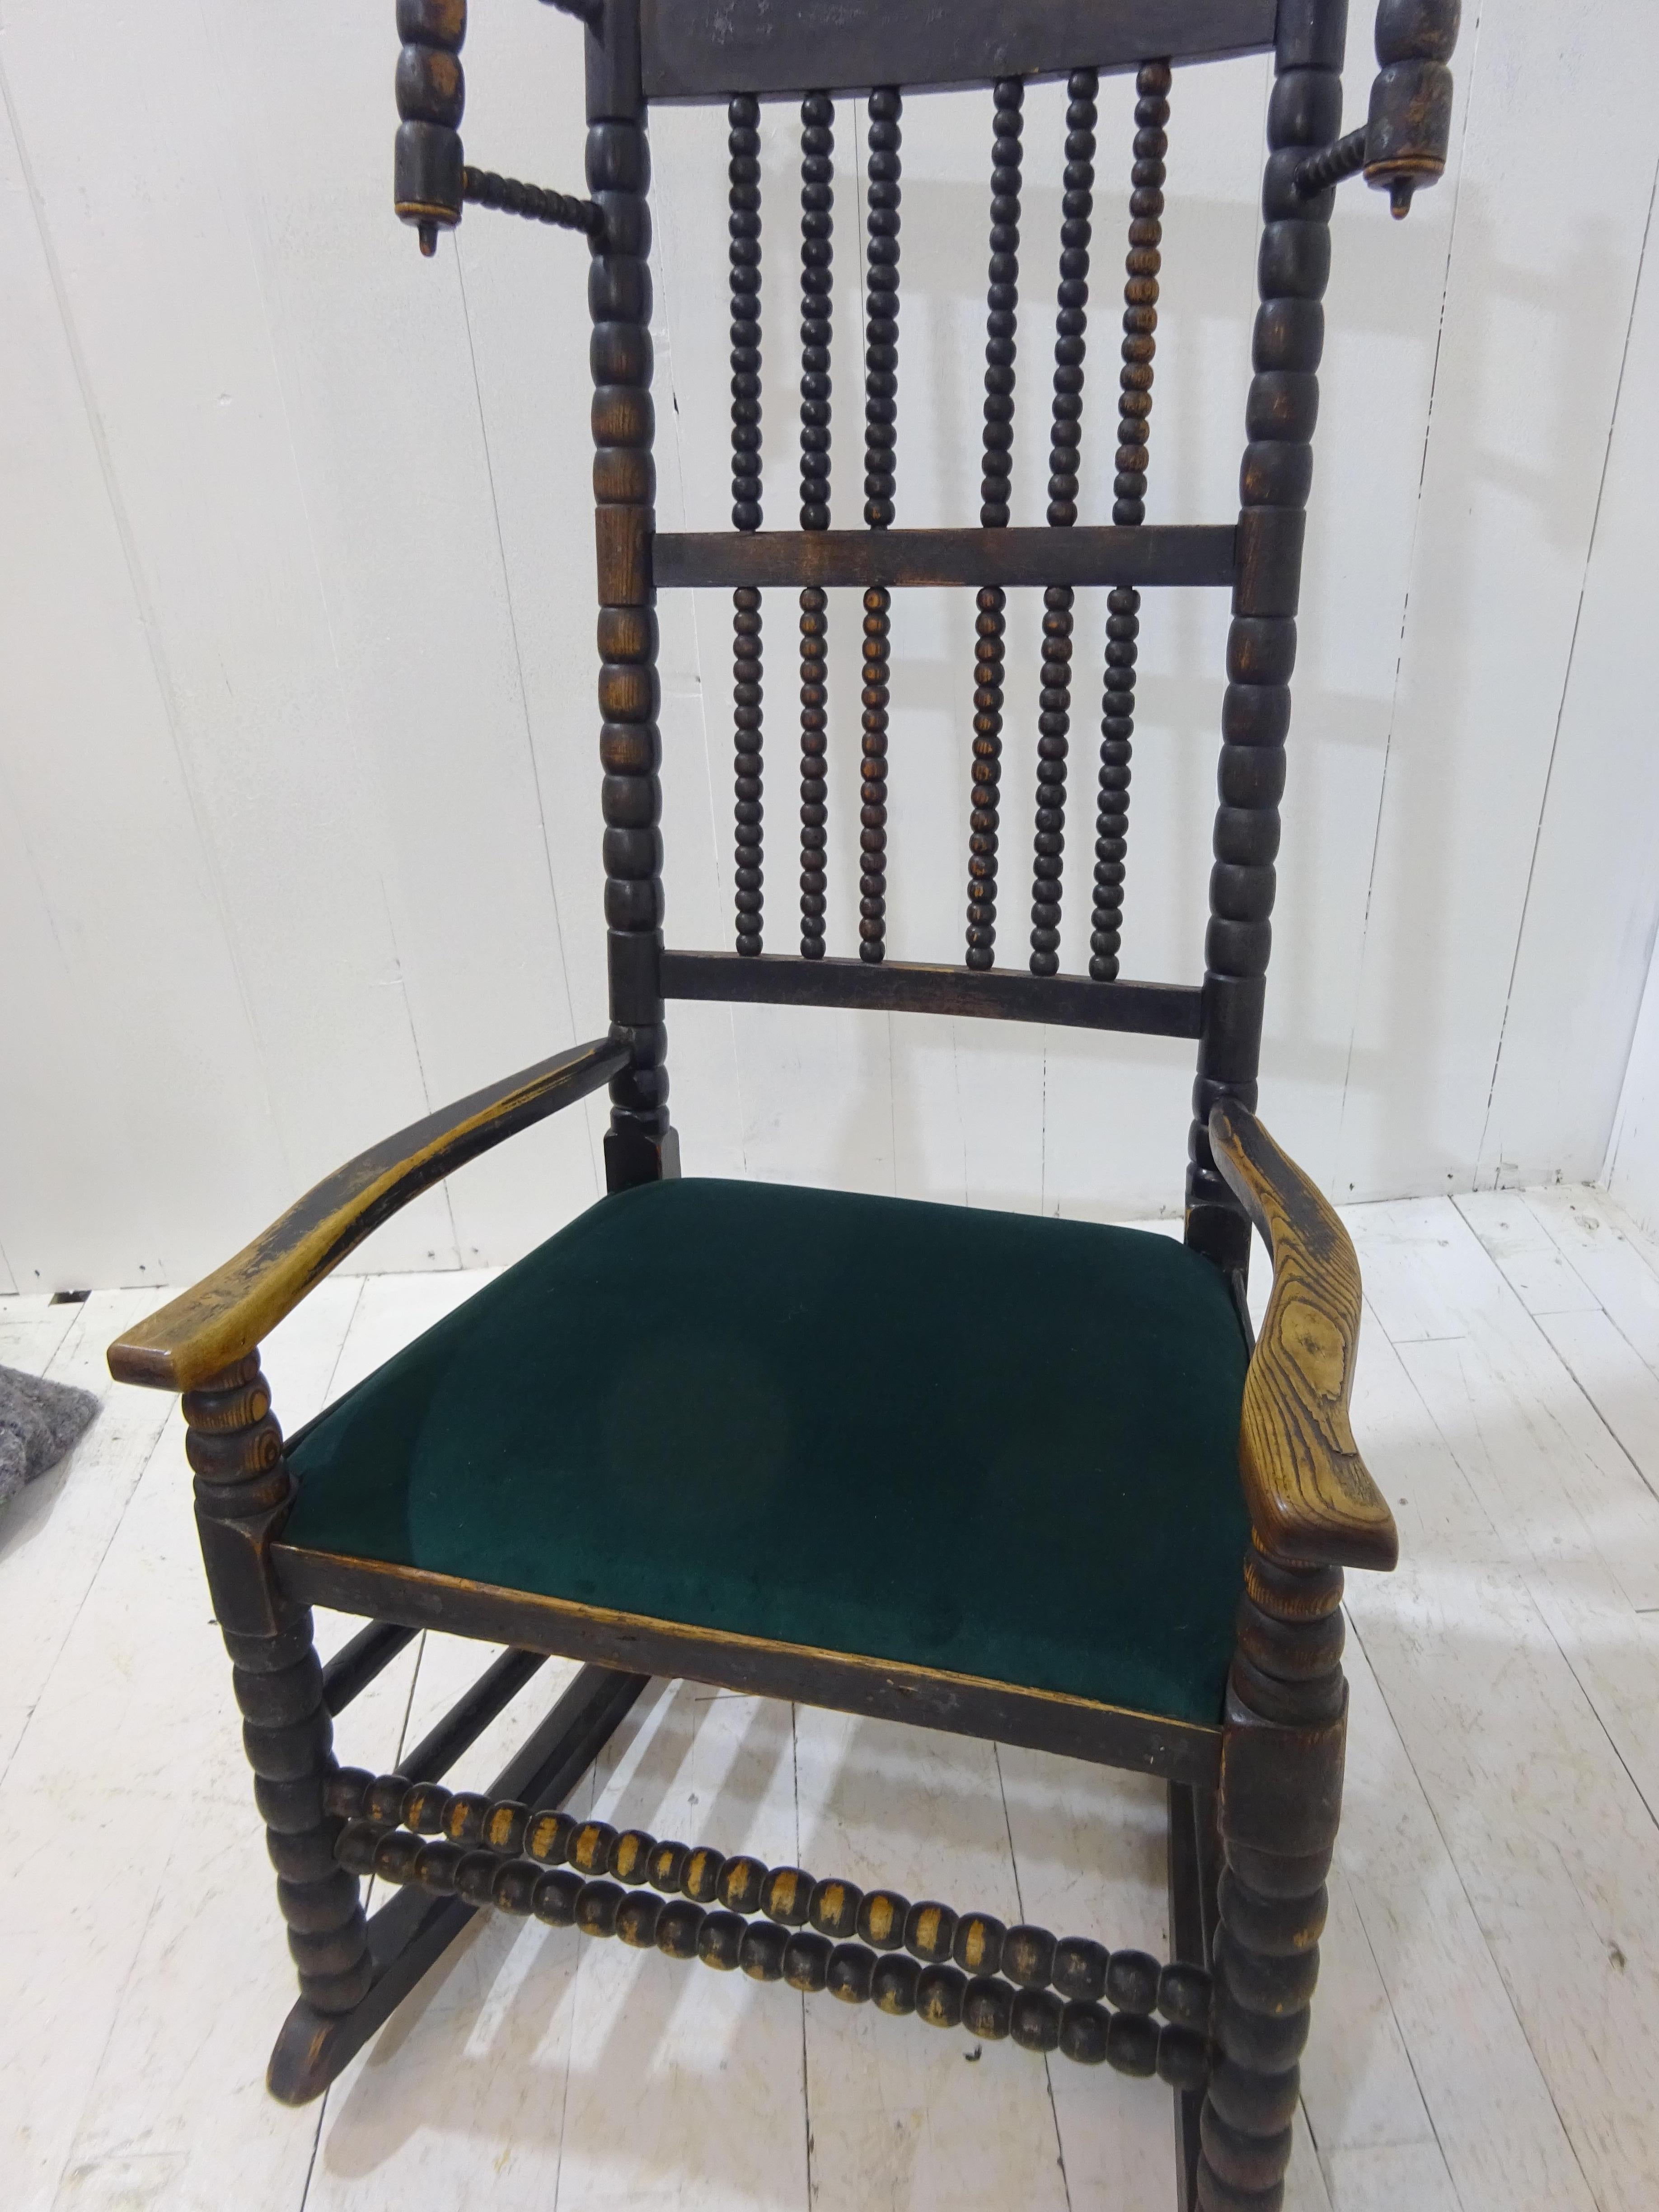 Lancashire Bobbin rocking chair 

An original Lancashire bobbin rocking chair. 

A bobbin rocking chair with wool winders, early 19th century.  These were country chairs found in the English areas of Lancashire and Cheshire. Wool winders would